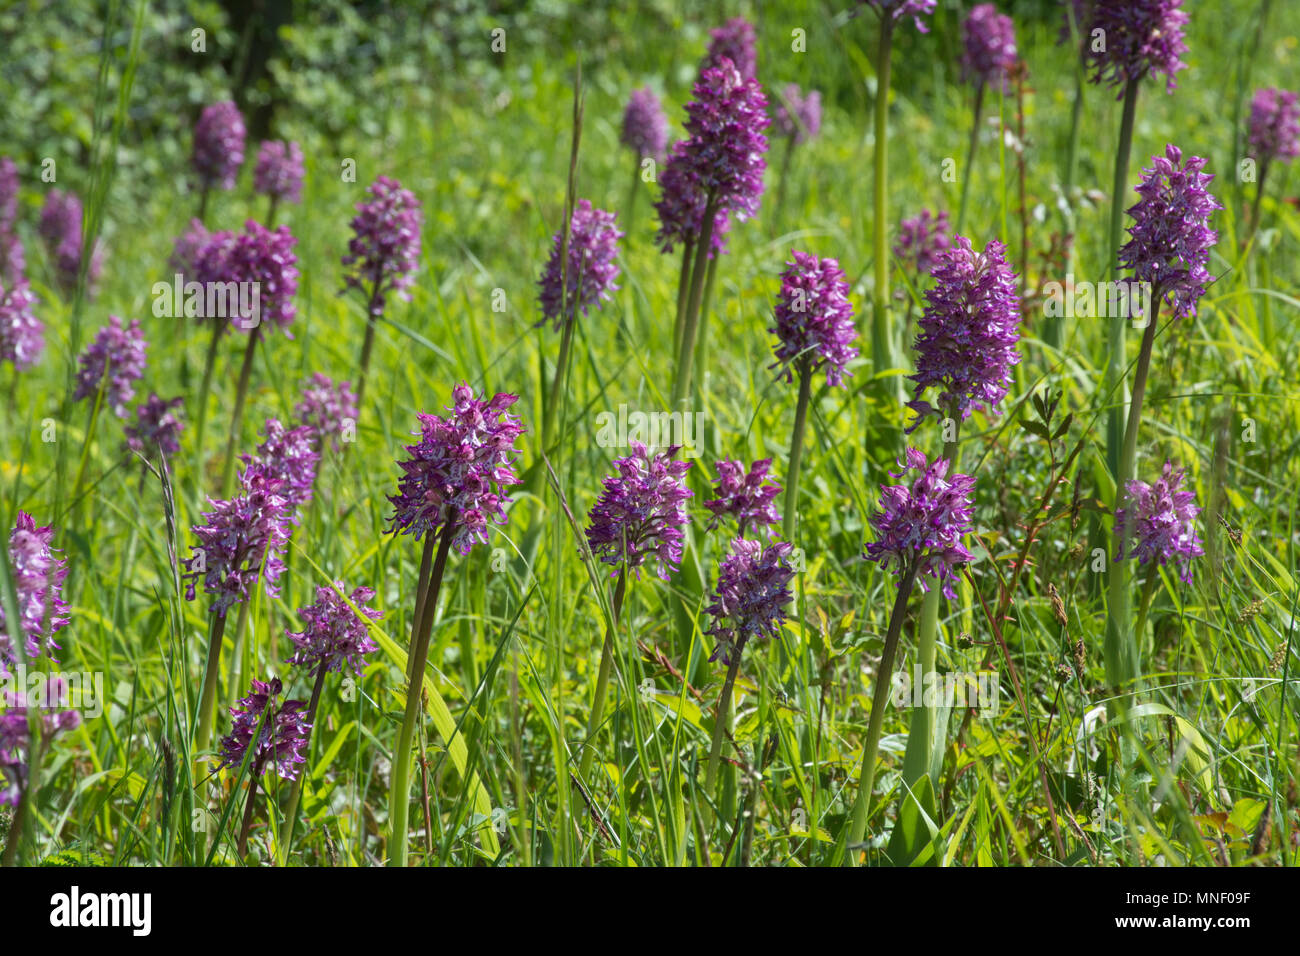 Group of hybrid orchids (monkey x lady orchid) (Orchis purpurea x simia) at Hartslock Nature Reserve, Goring on Thames, South Oxfordshire, UK Stock Photo